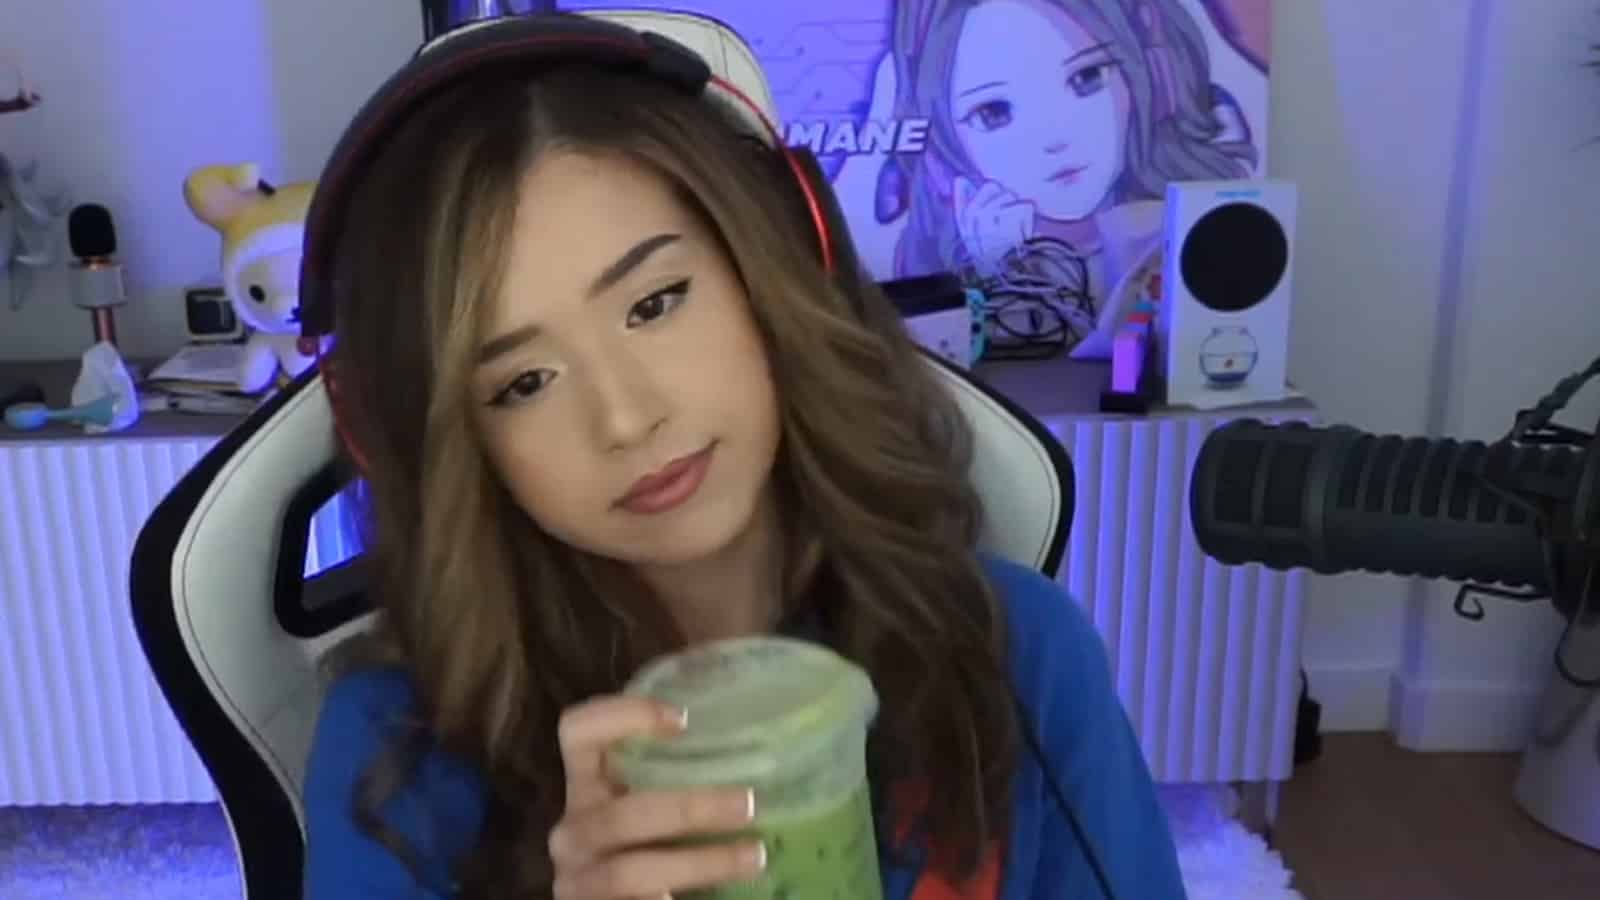 Pokimane admits she'd consider dating a Twitch fan: “It depends on the situation"